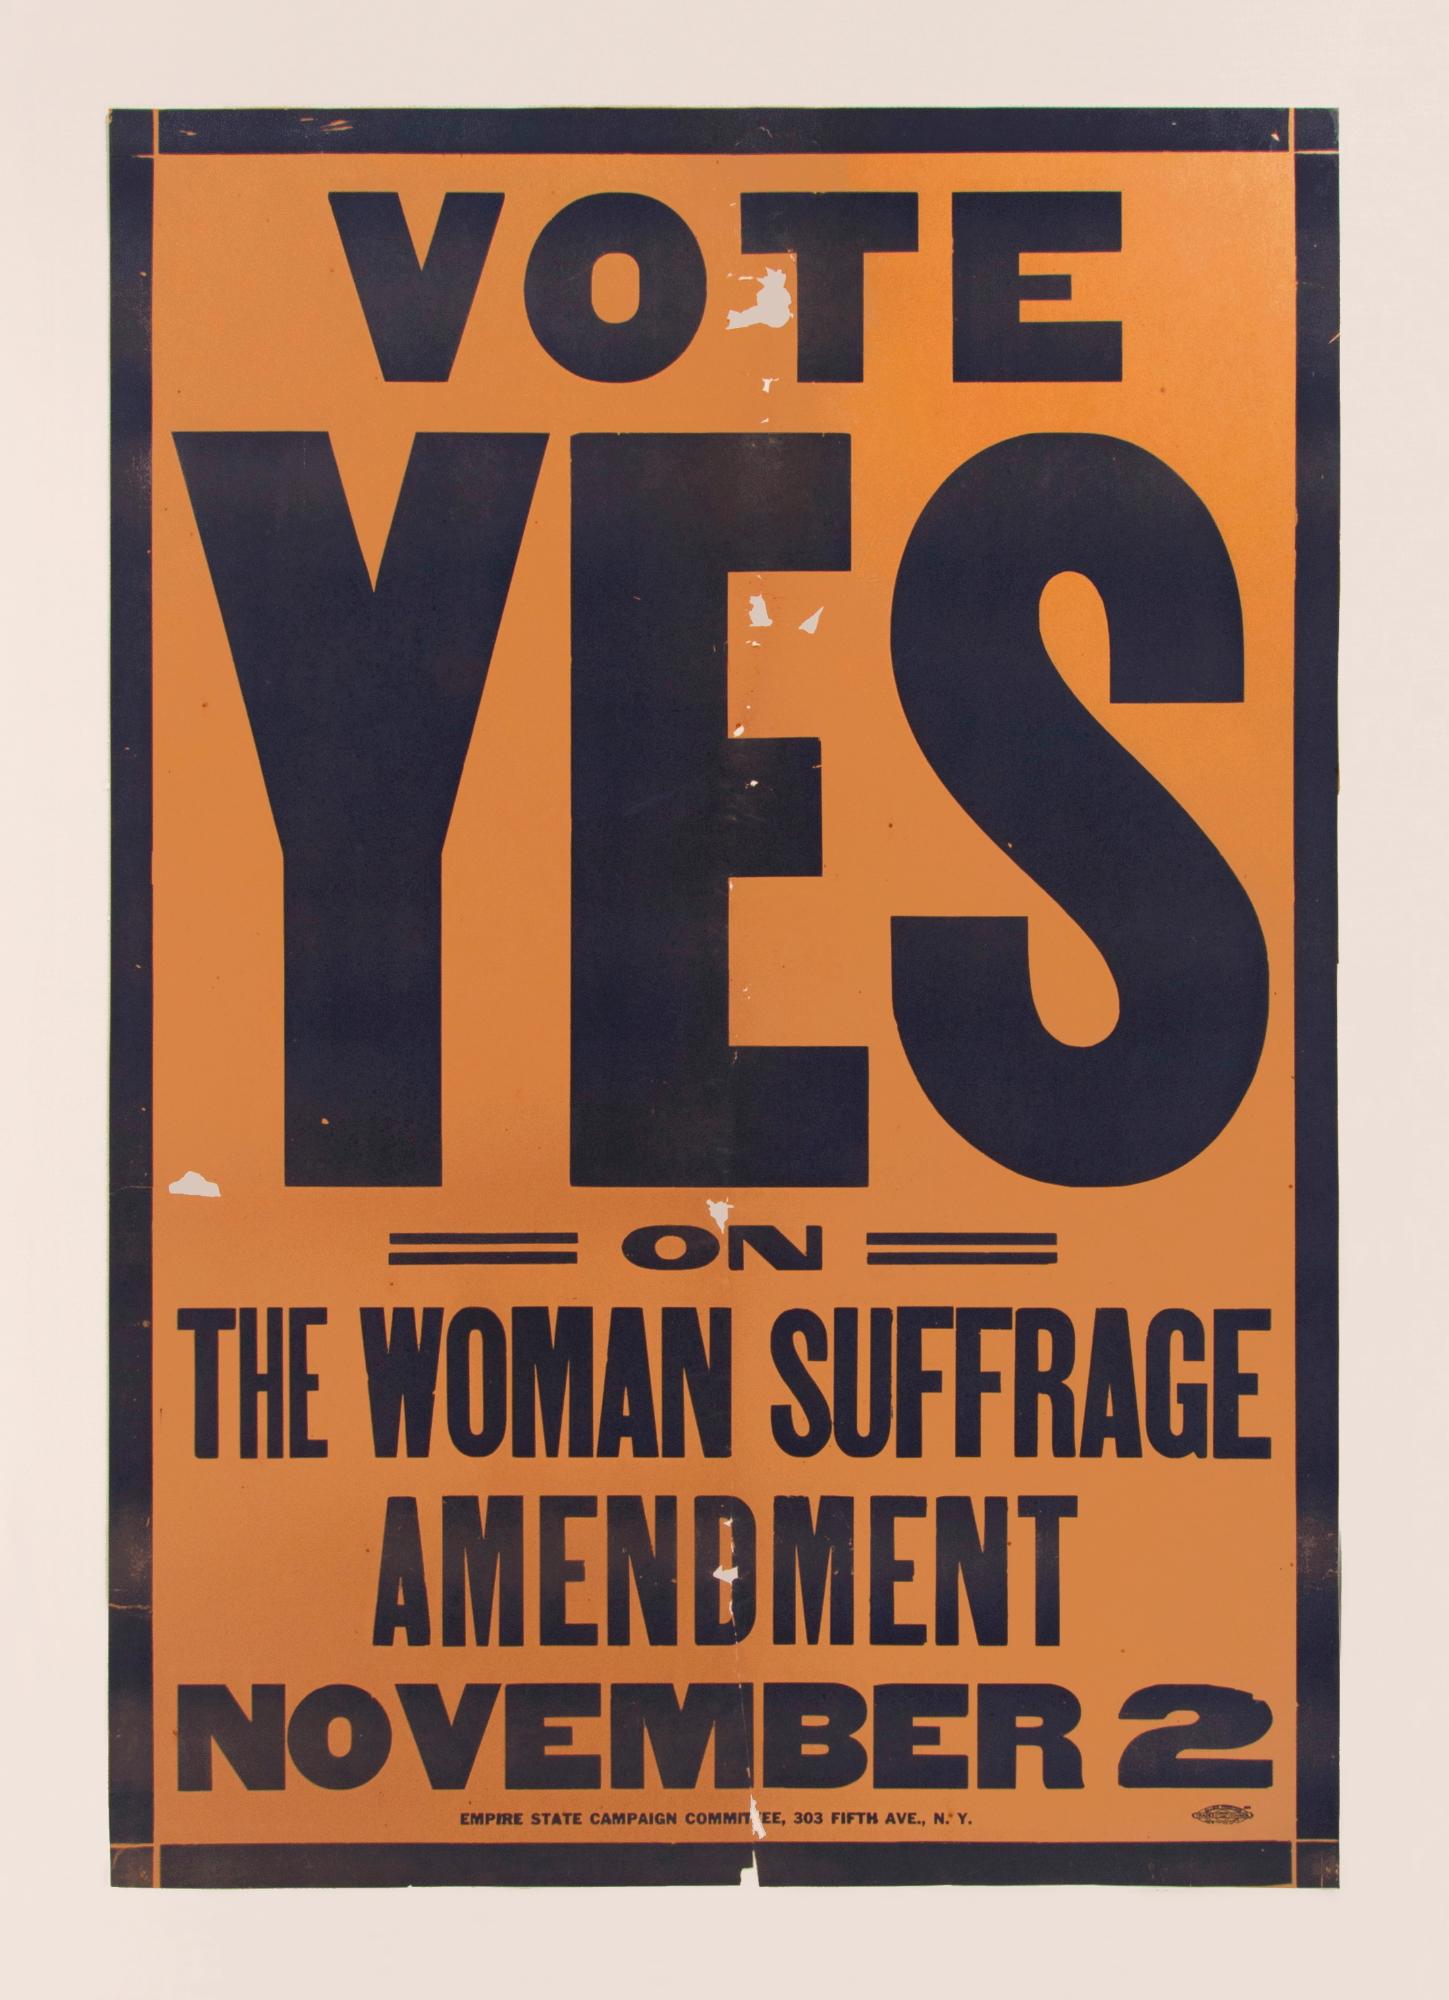 RARE & BOLDLY GRAPHIC AMERICAN SUFFRAGETTE POSTER, COMMISSIONED BY THE EMPIRE STATE CAMPAIGN COMMITTEE, CARRIE CHAPMAN CATT’S GROUP, circa 1915

Extremely rare and boldly graphic Suffragette movement poster, with a golden yellow ground and dark blue